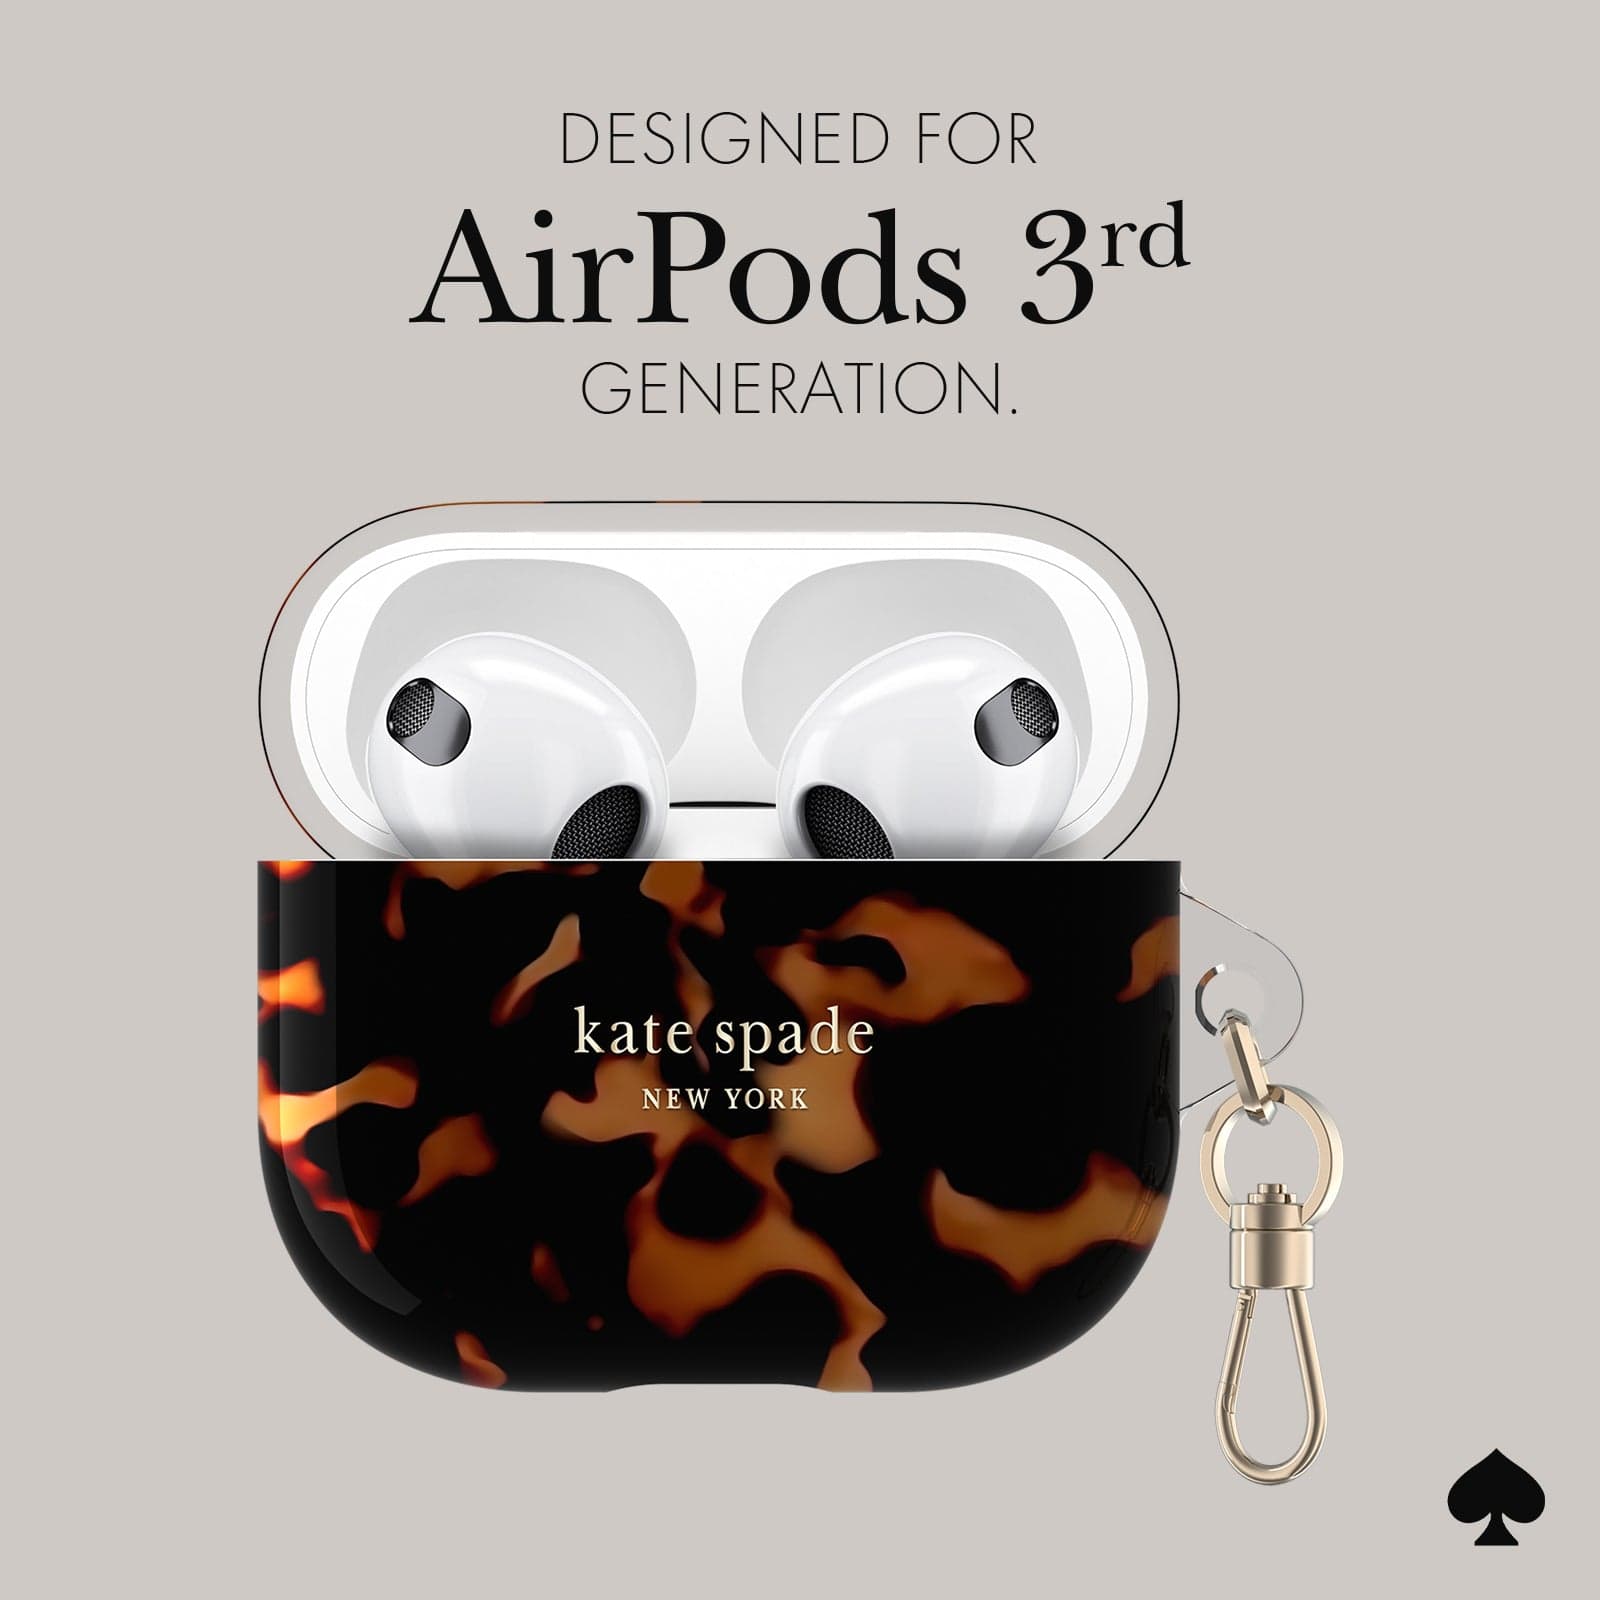 DESIGNED FOR AIRPODS 3RD GENERATION